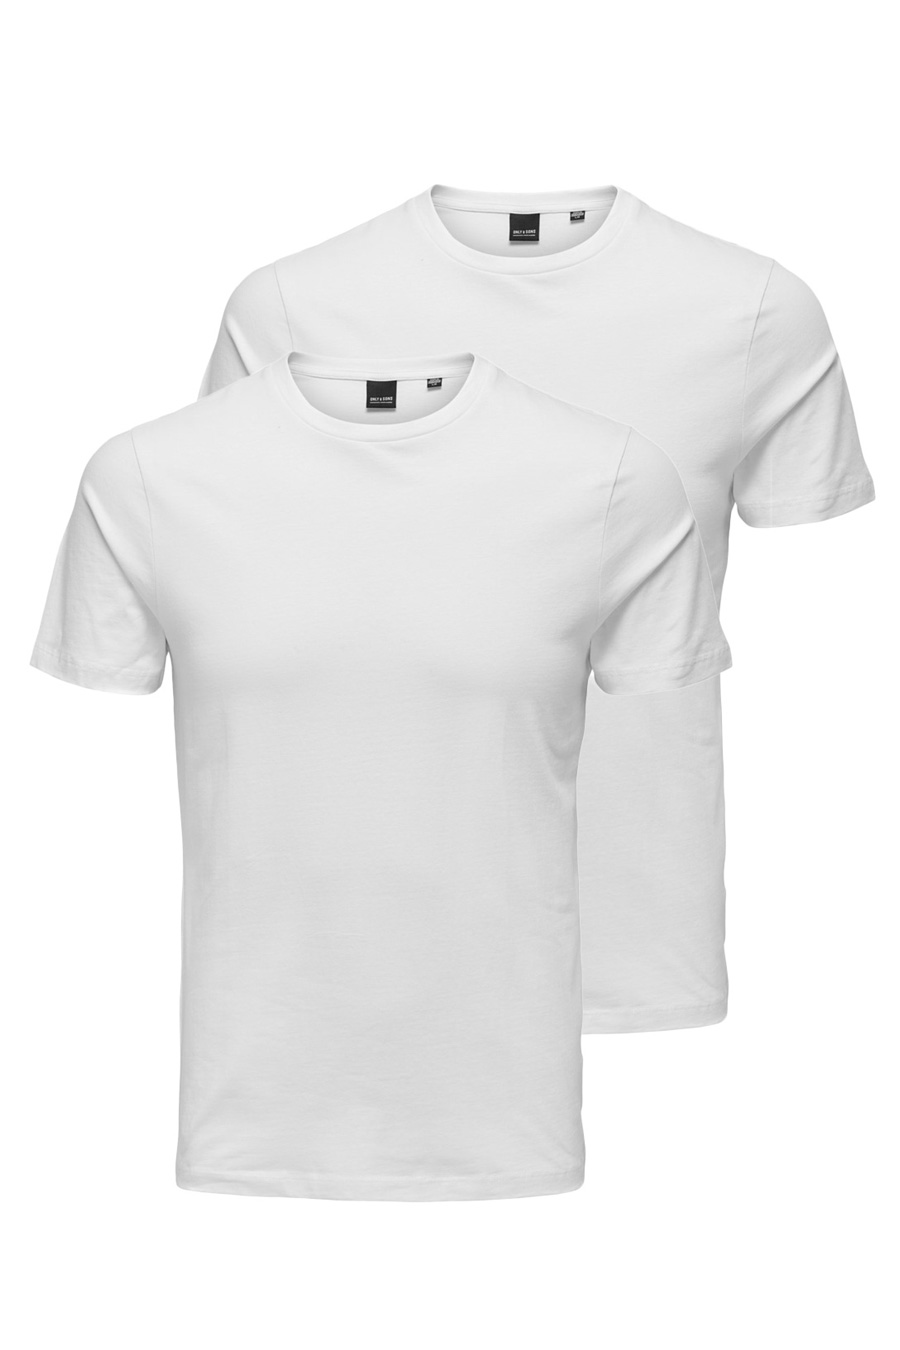 T-shirt ONLY & SONS 22021181-White